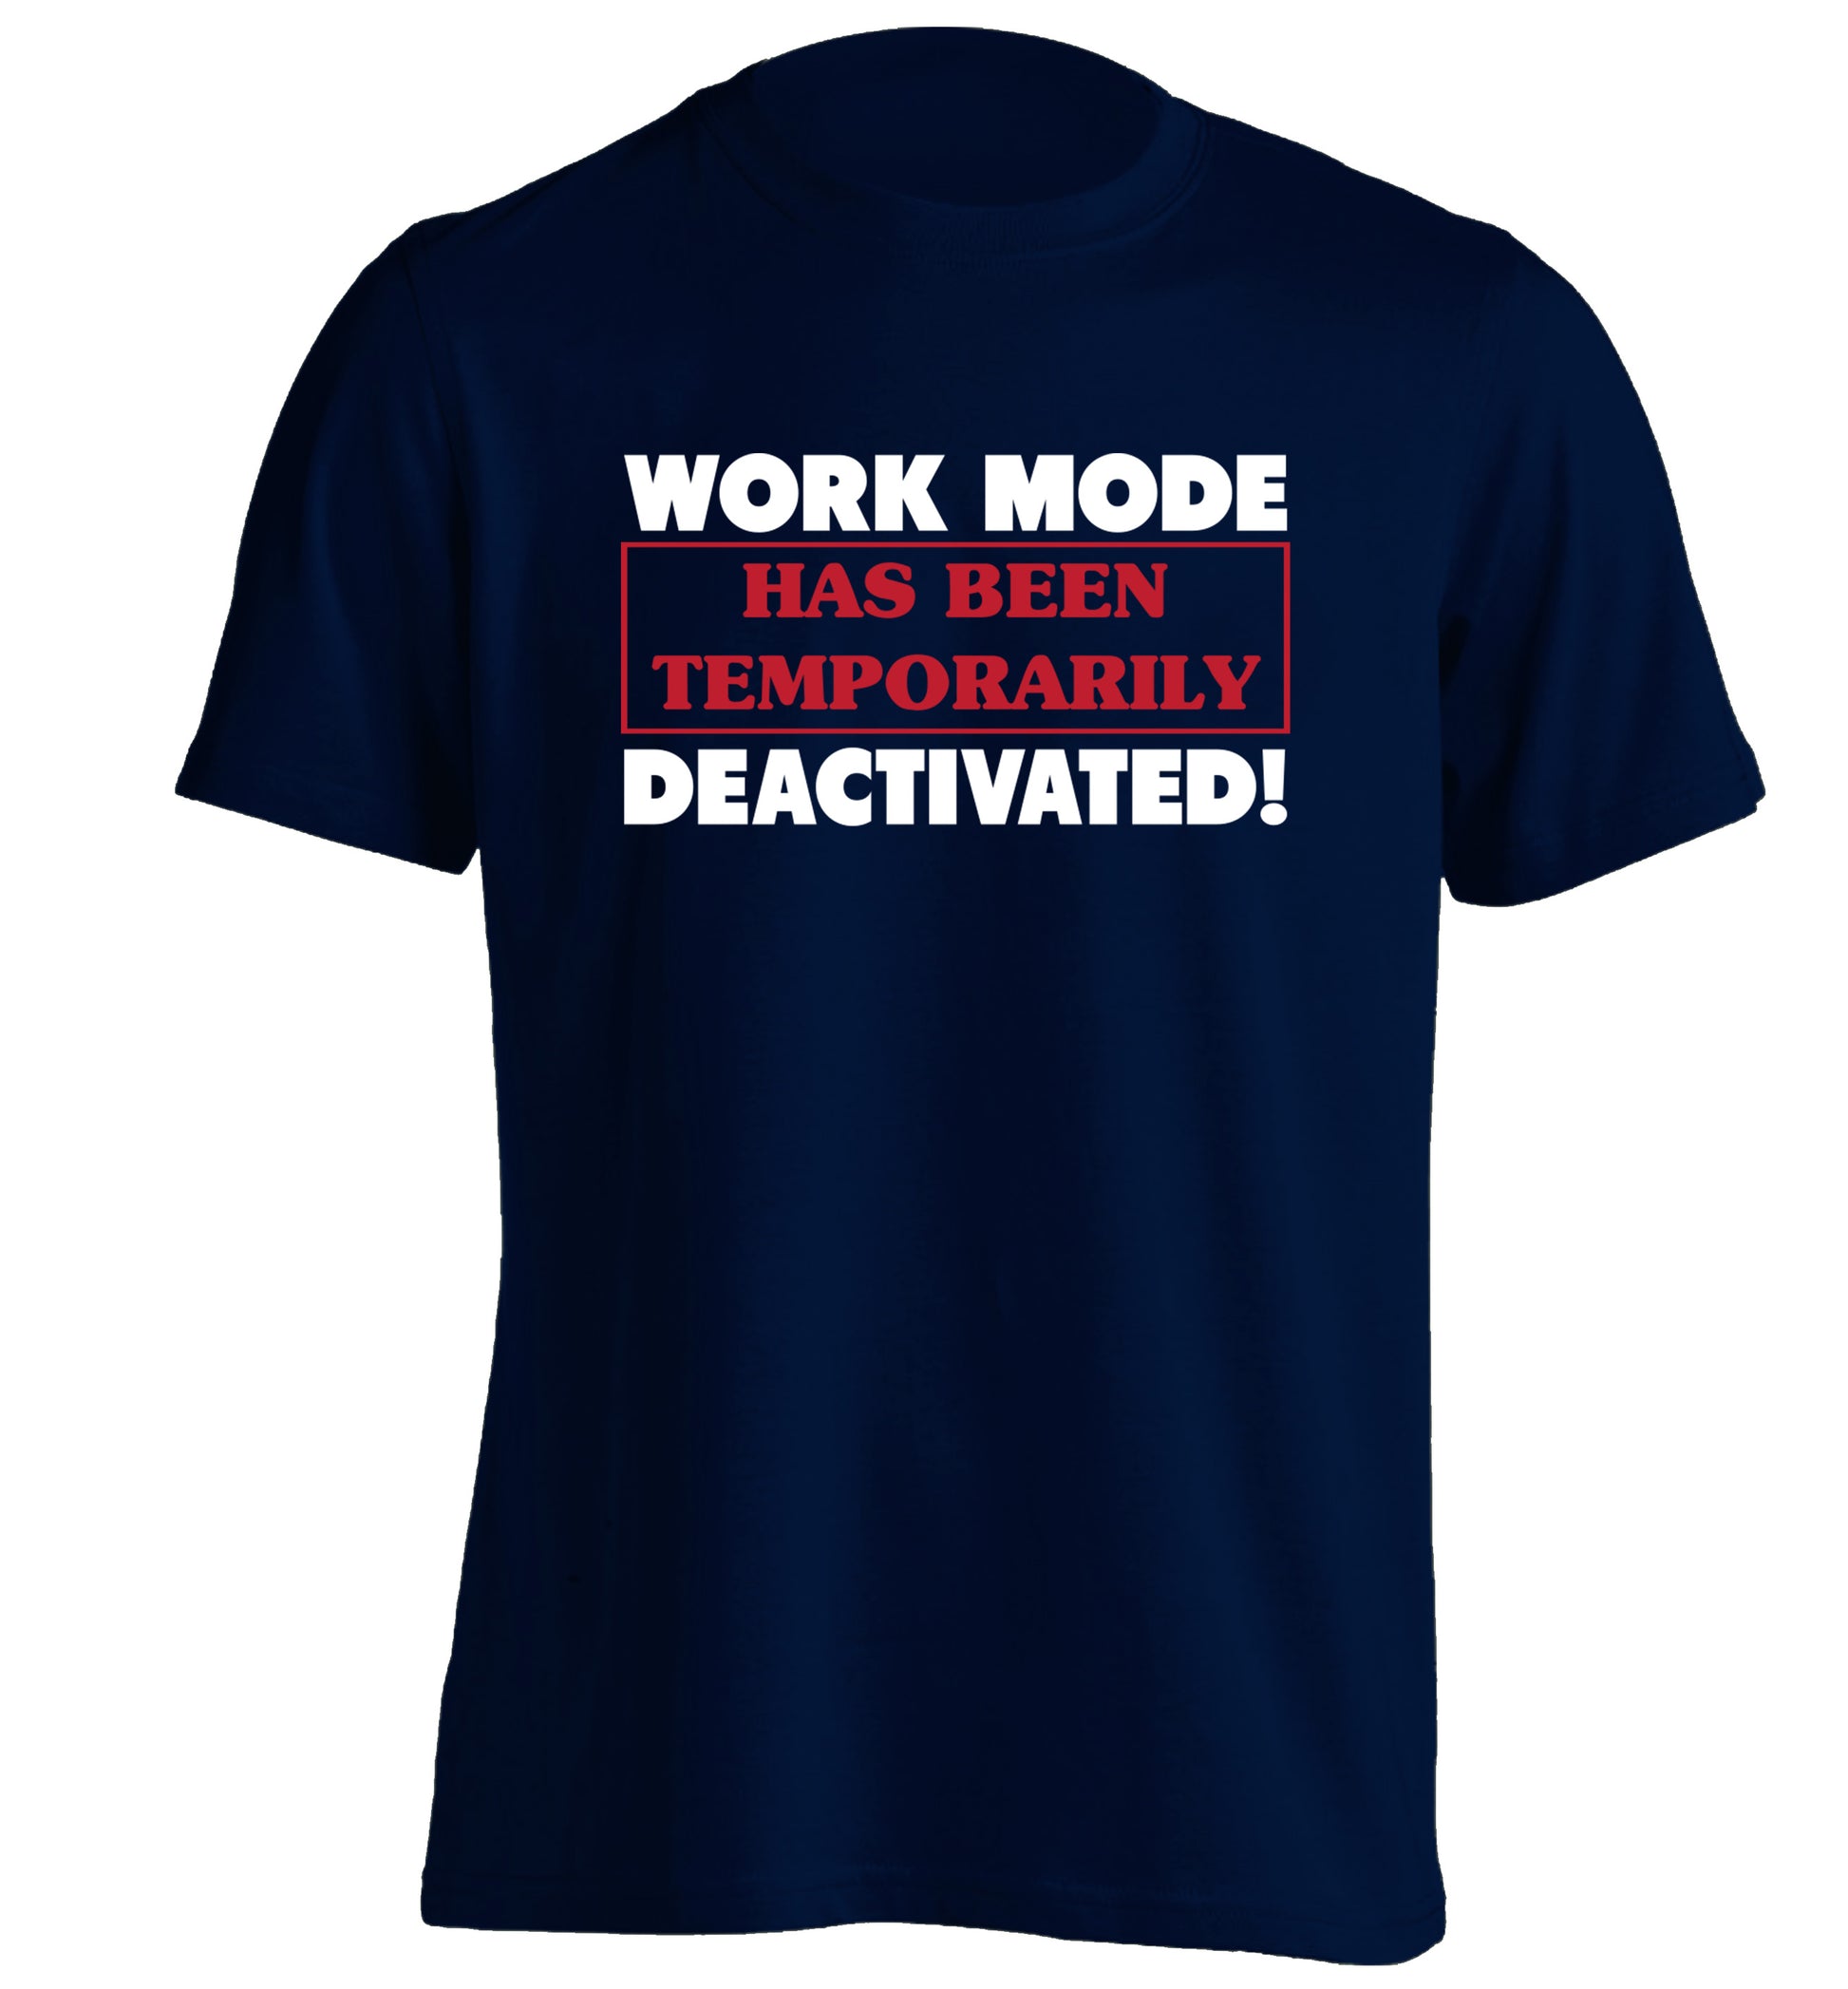 Work mode has now been temporarily deactivated adults unisex navy Tshirt 2XL